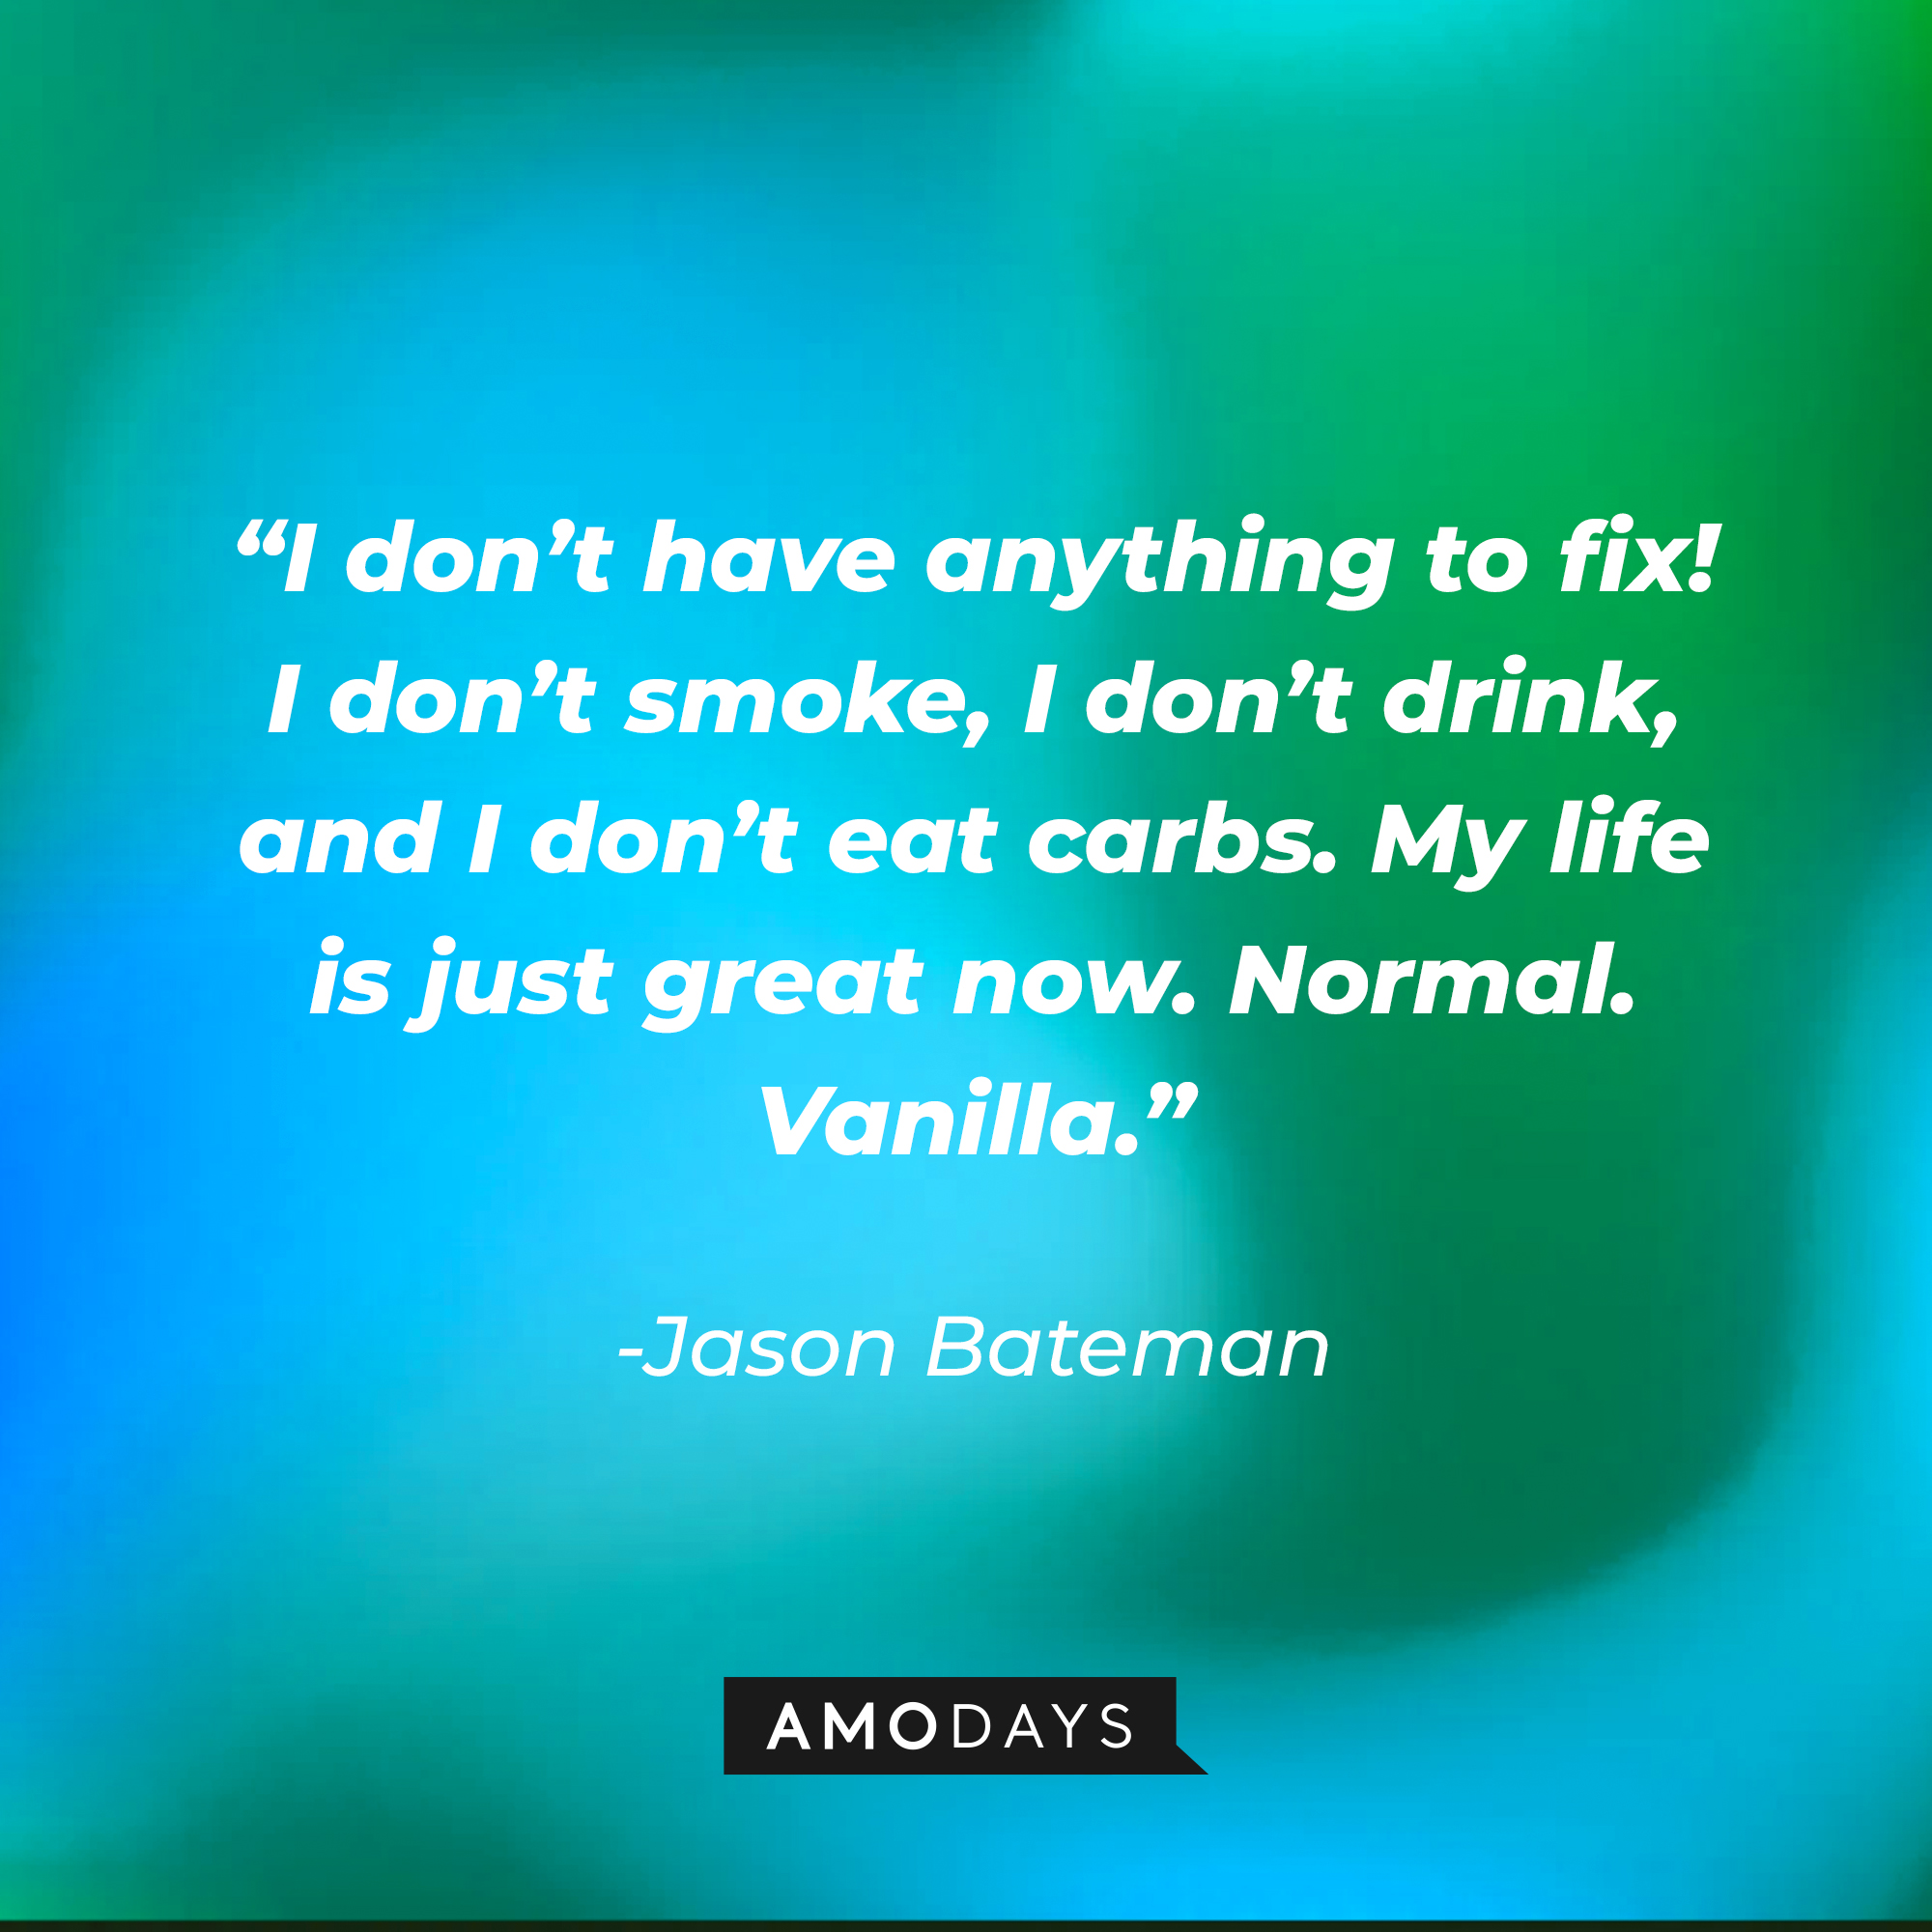 Jason Bateman's quote: “I don’t have anything to fix! I don’t smoke, I don’t drink, and I don’t eat carbs. My life is just great now. Normal. Vanilla.” | Source: Amodays